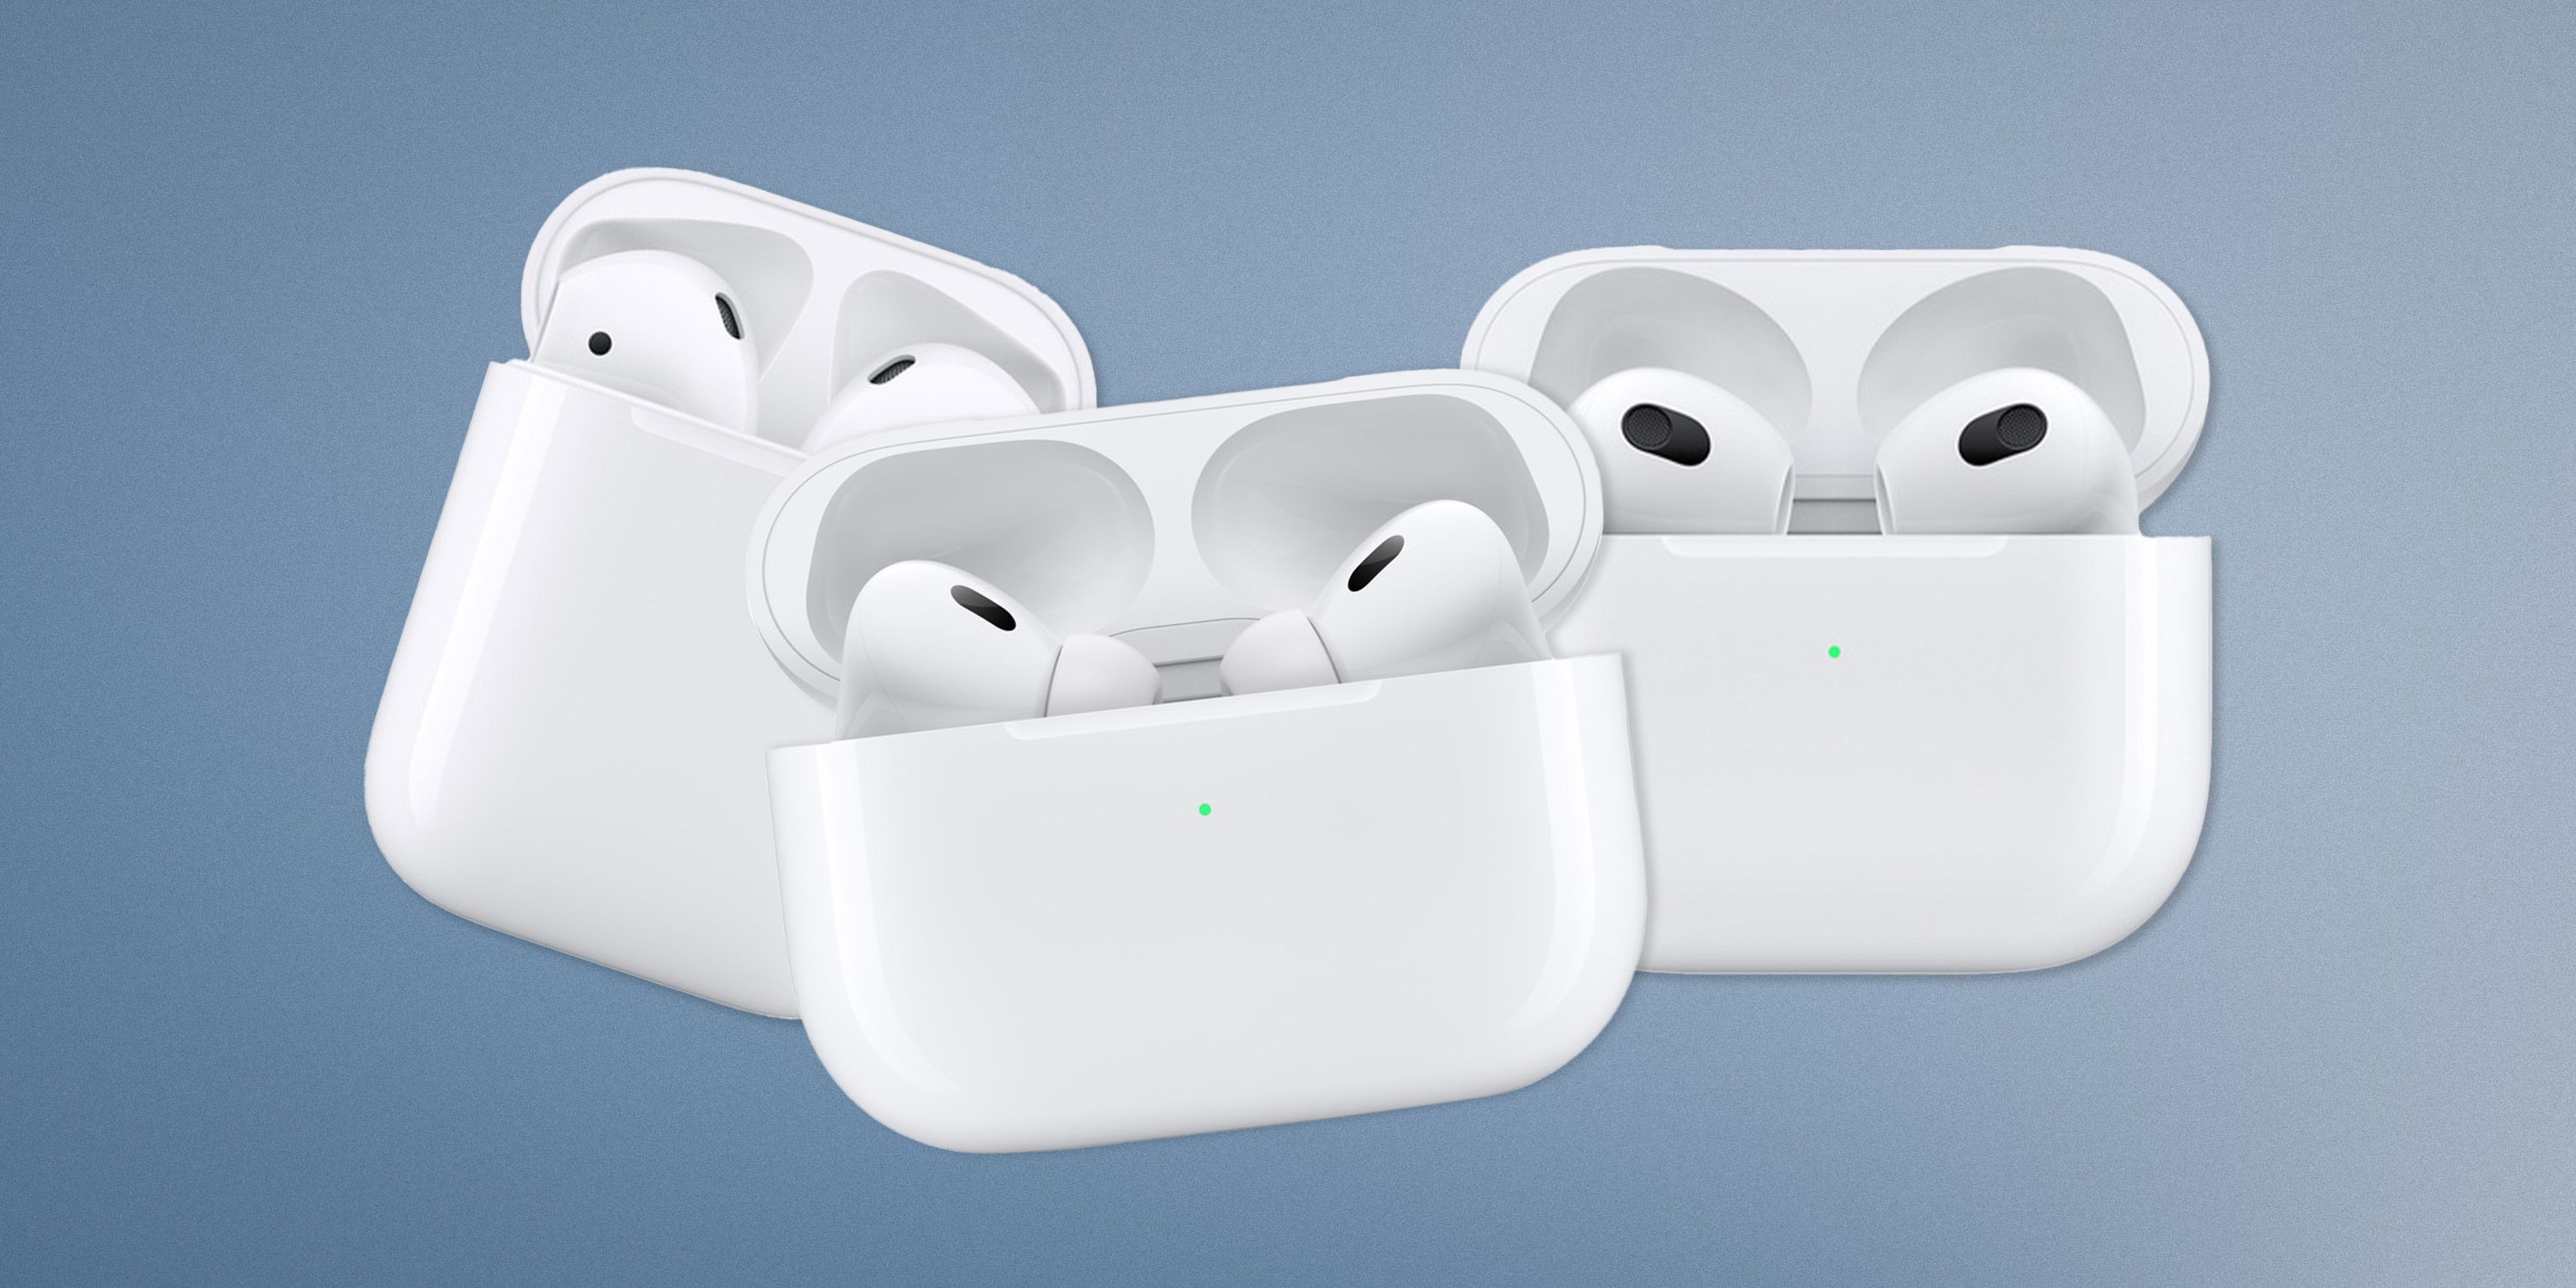 Apple Makes 3 Types of AirPods. Which Should Buy?